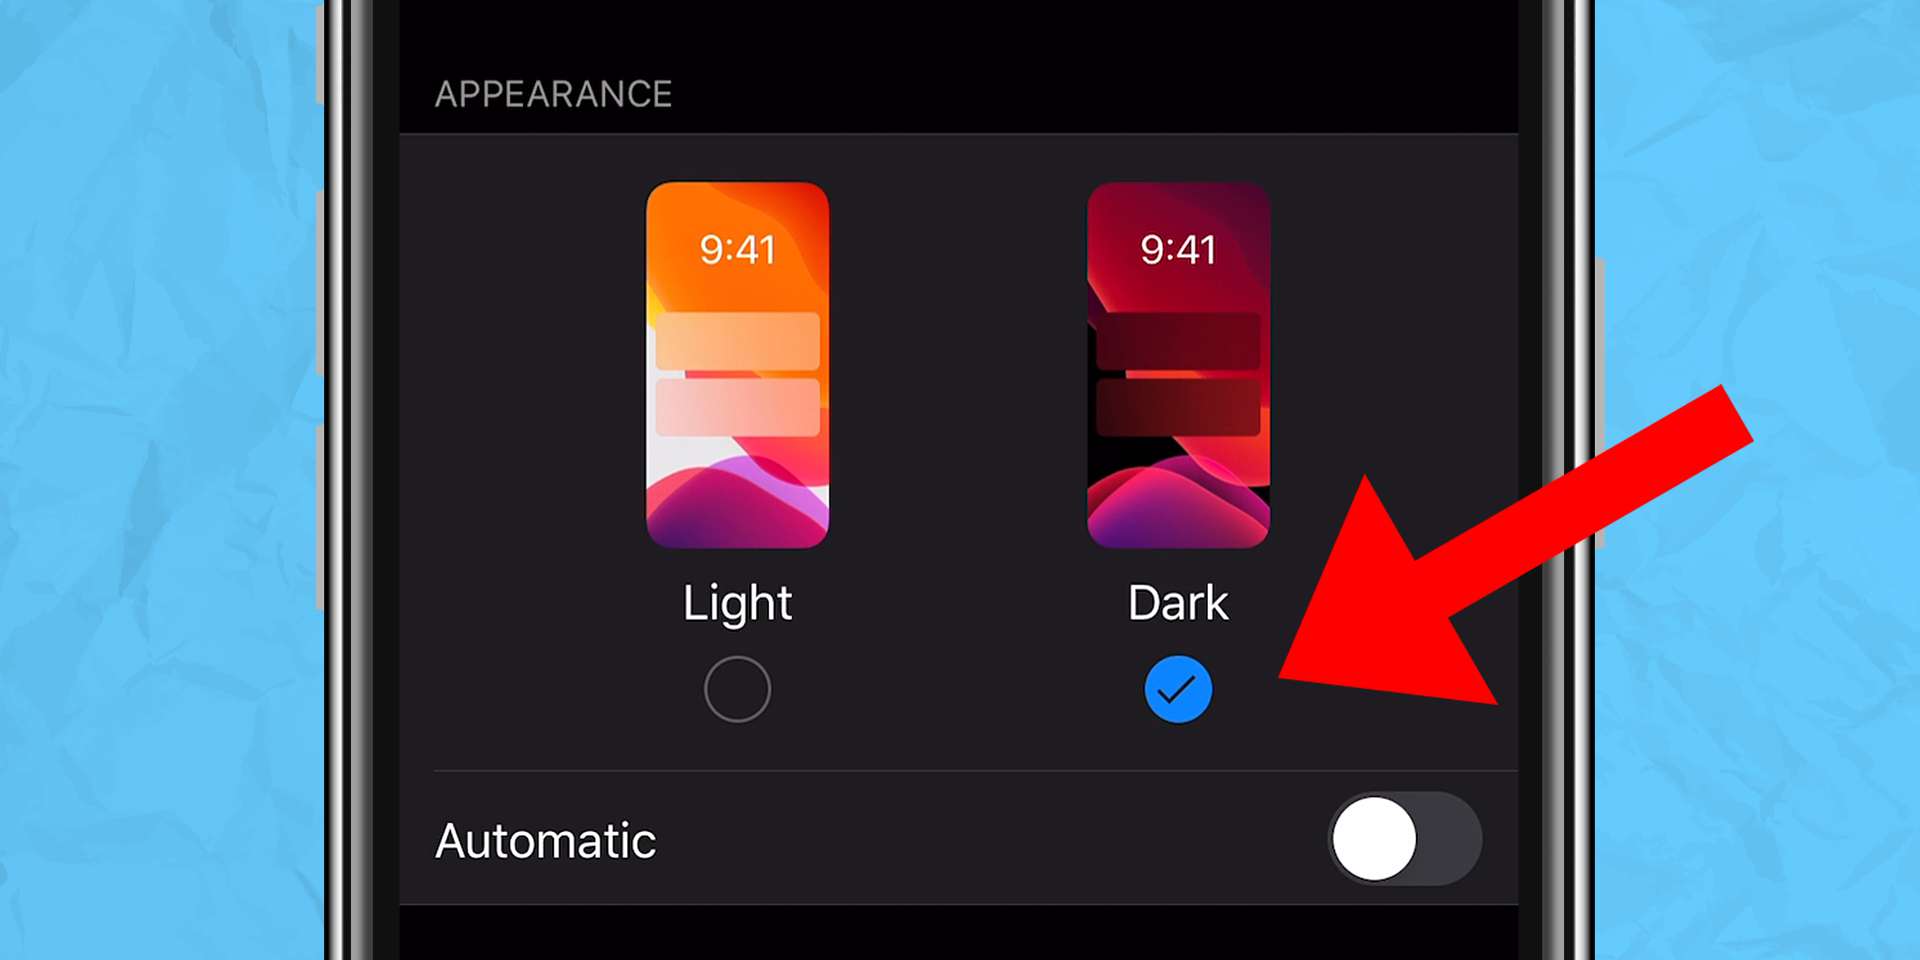 Taboola Ad Example 40882 - How To Take Full Advantage Of The IPhone's New Dark Mode